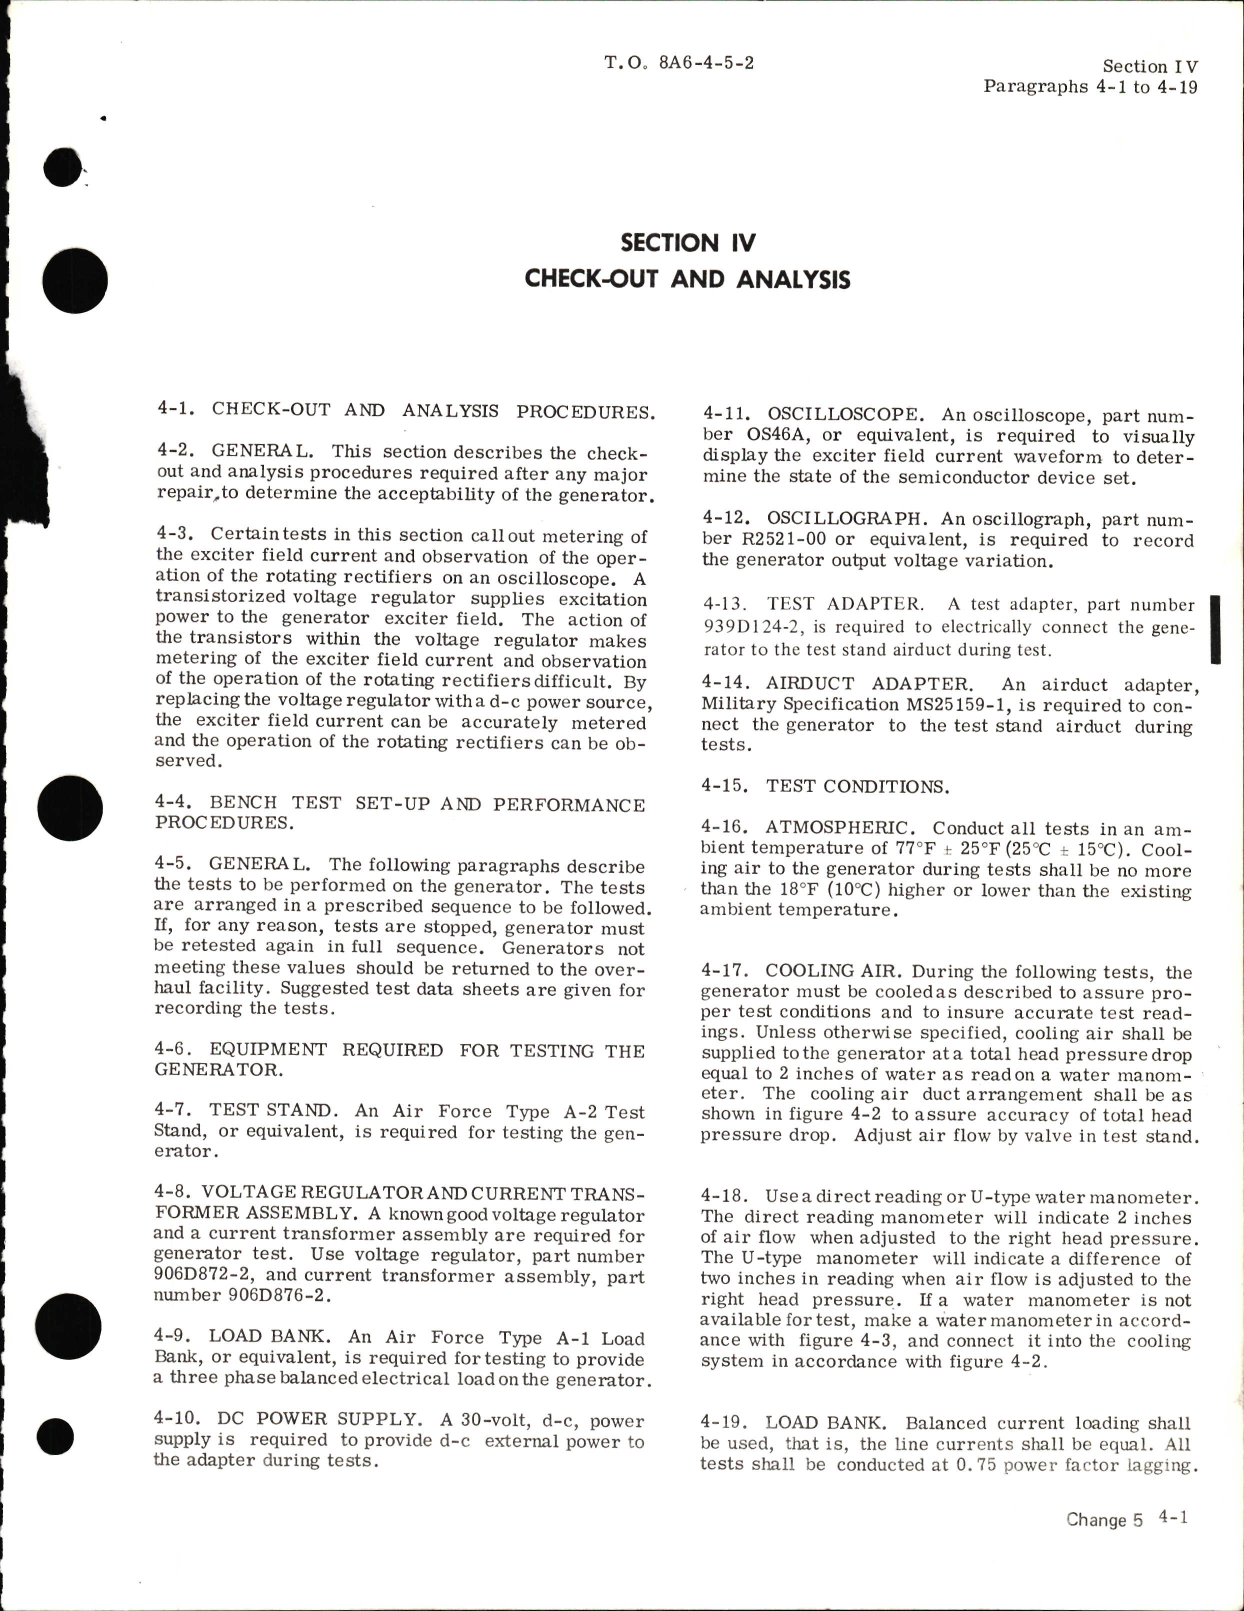 Sample page 5 from AirCorps Library document: Field Maintenance Instructions for AC Generator 904J026-4 and -5 